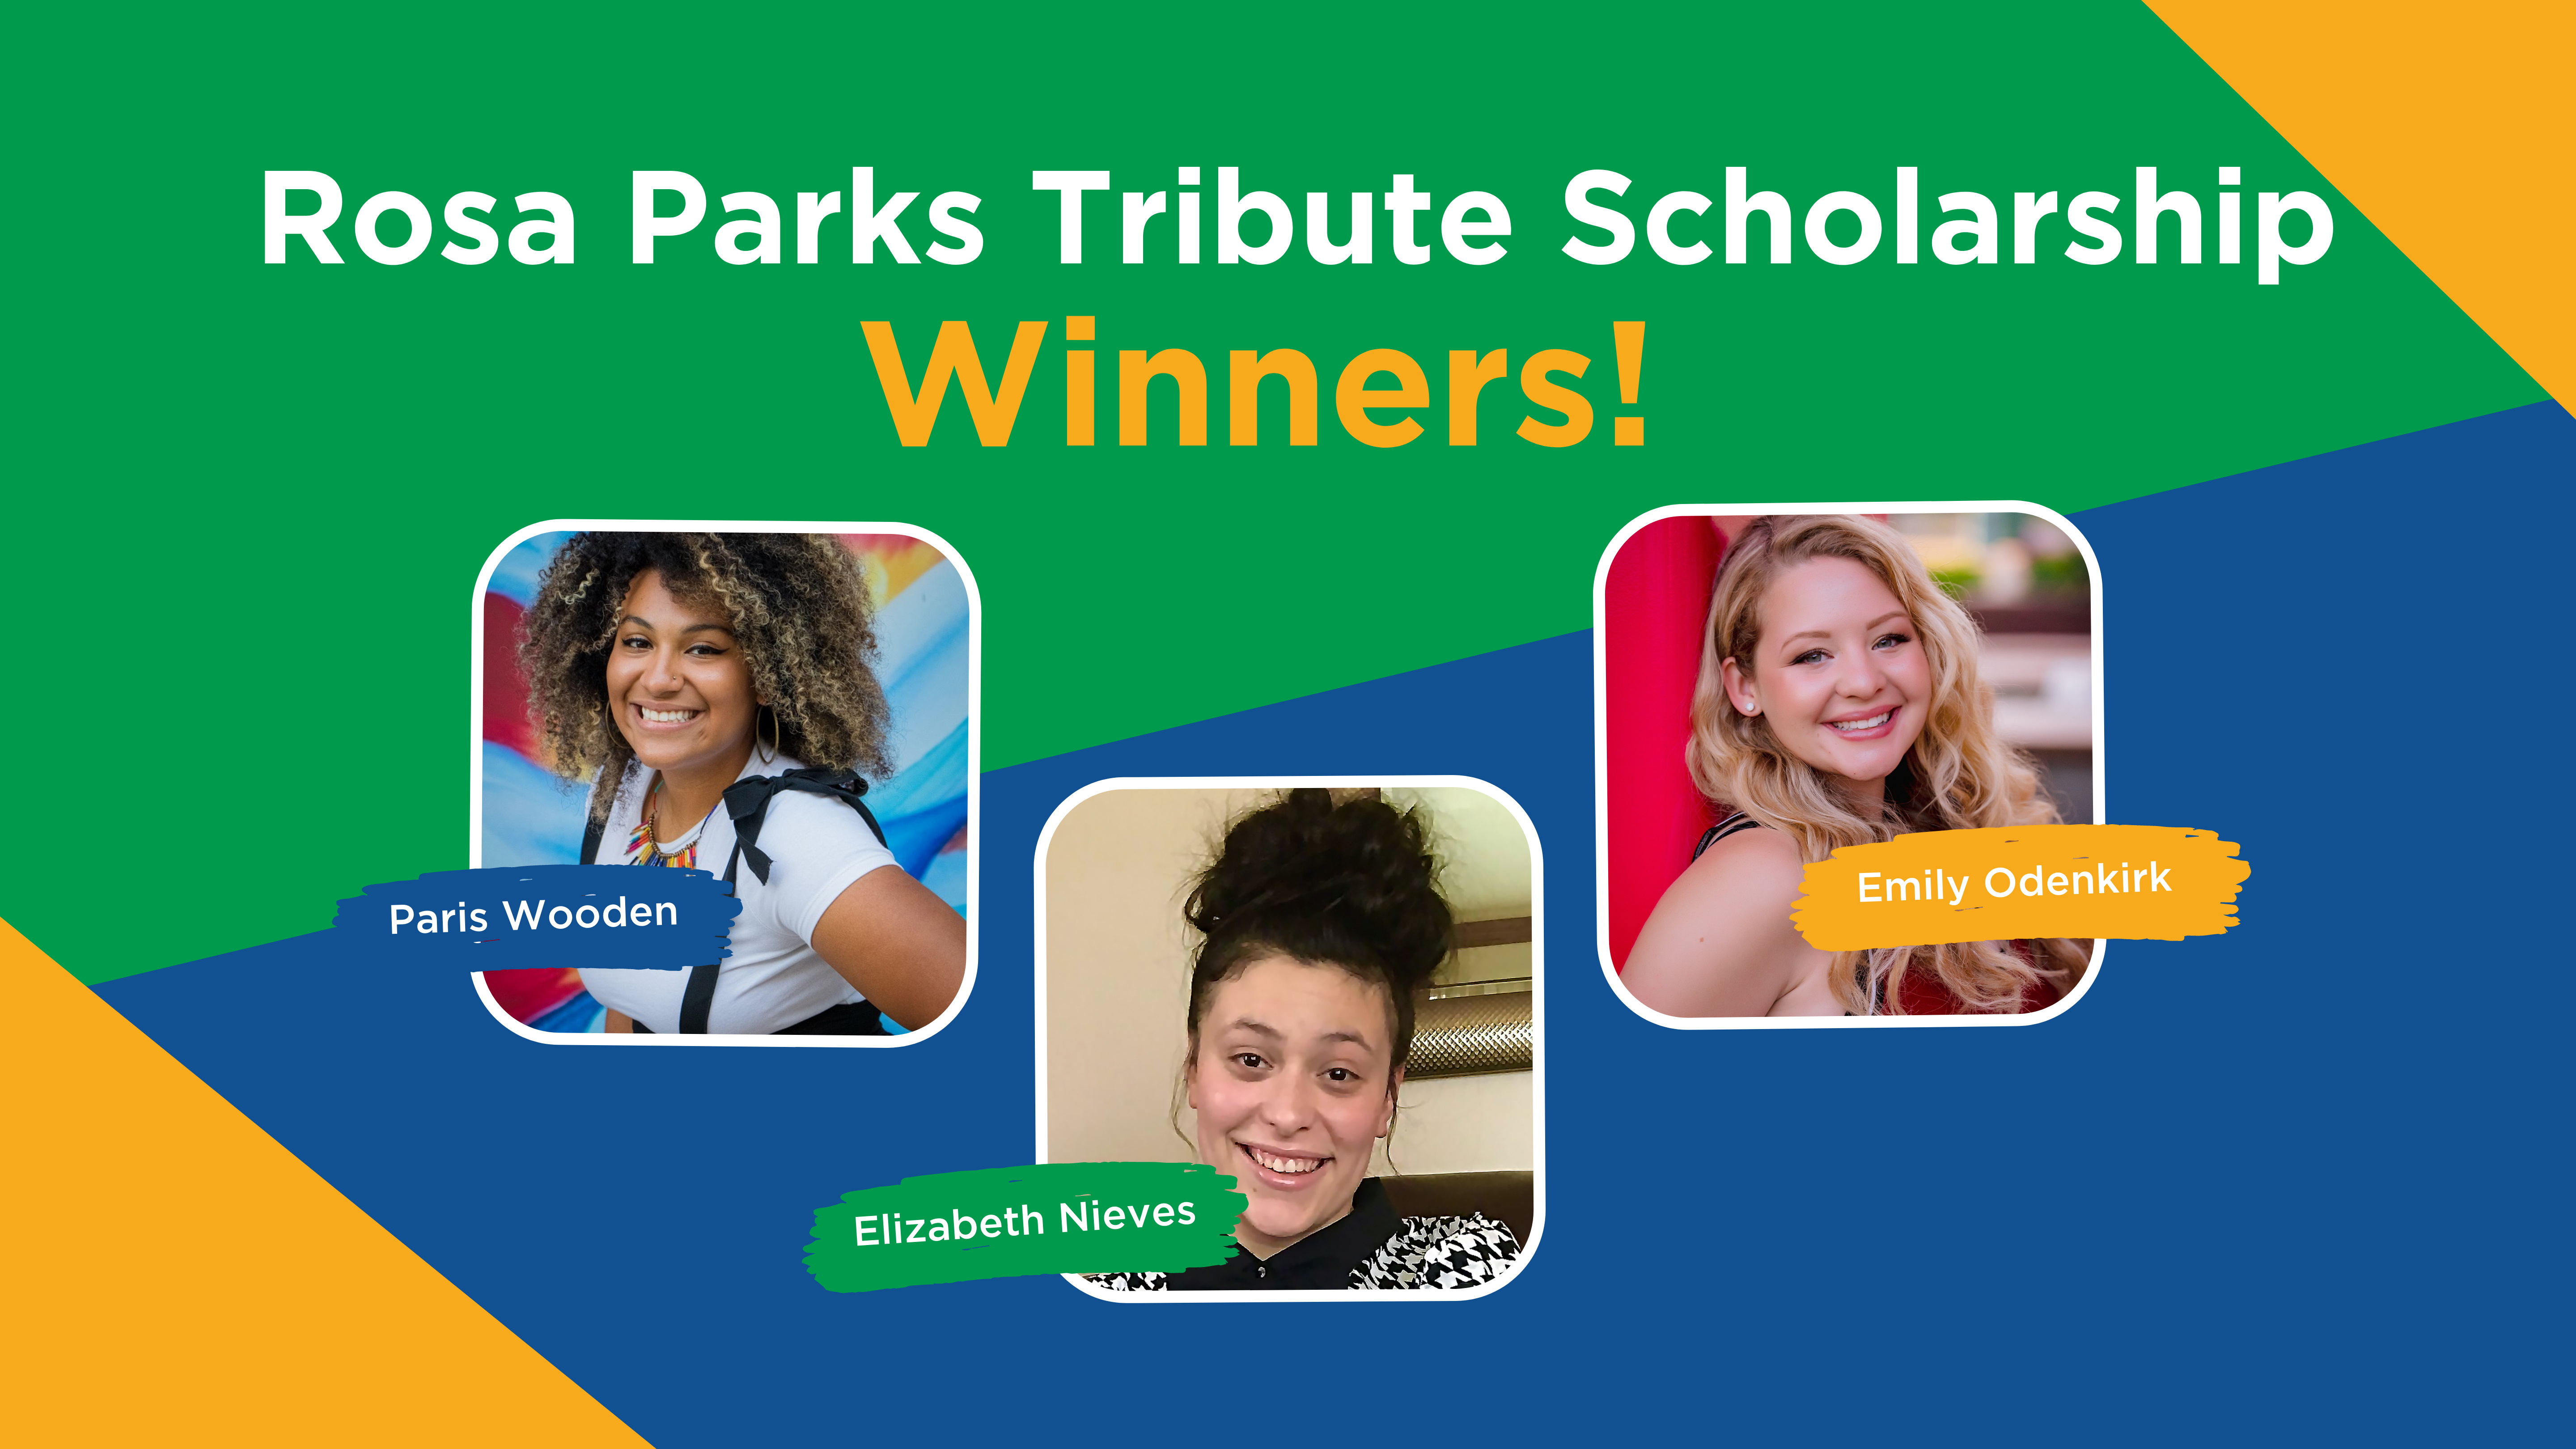 MCTS Announces Rosa Parks Scholarship Recipients on Her Birthday